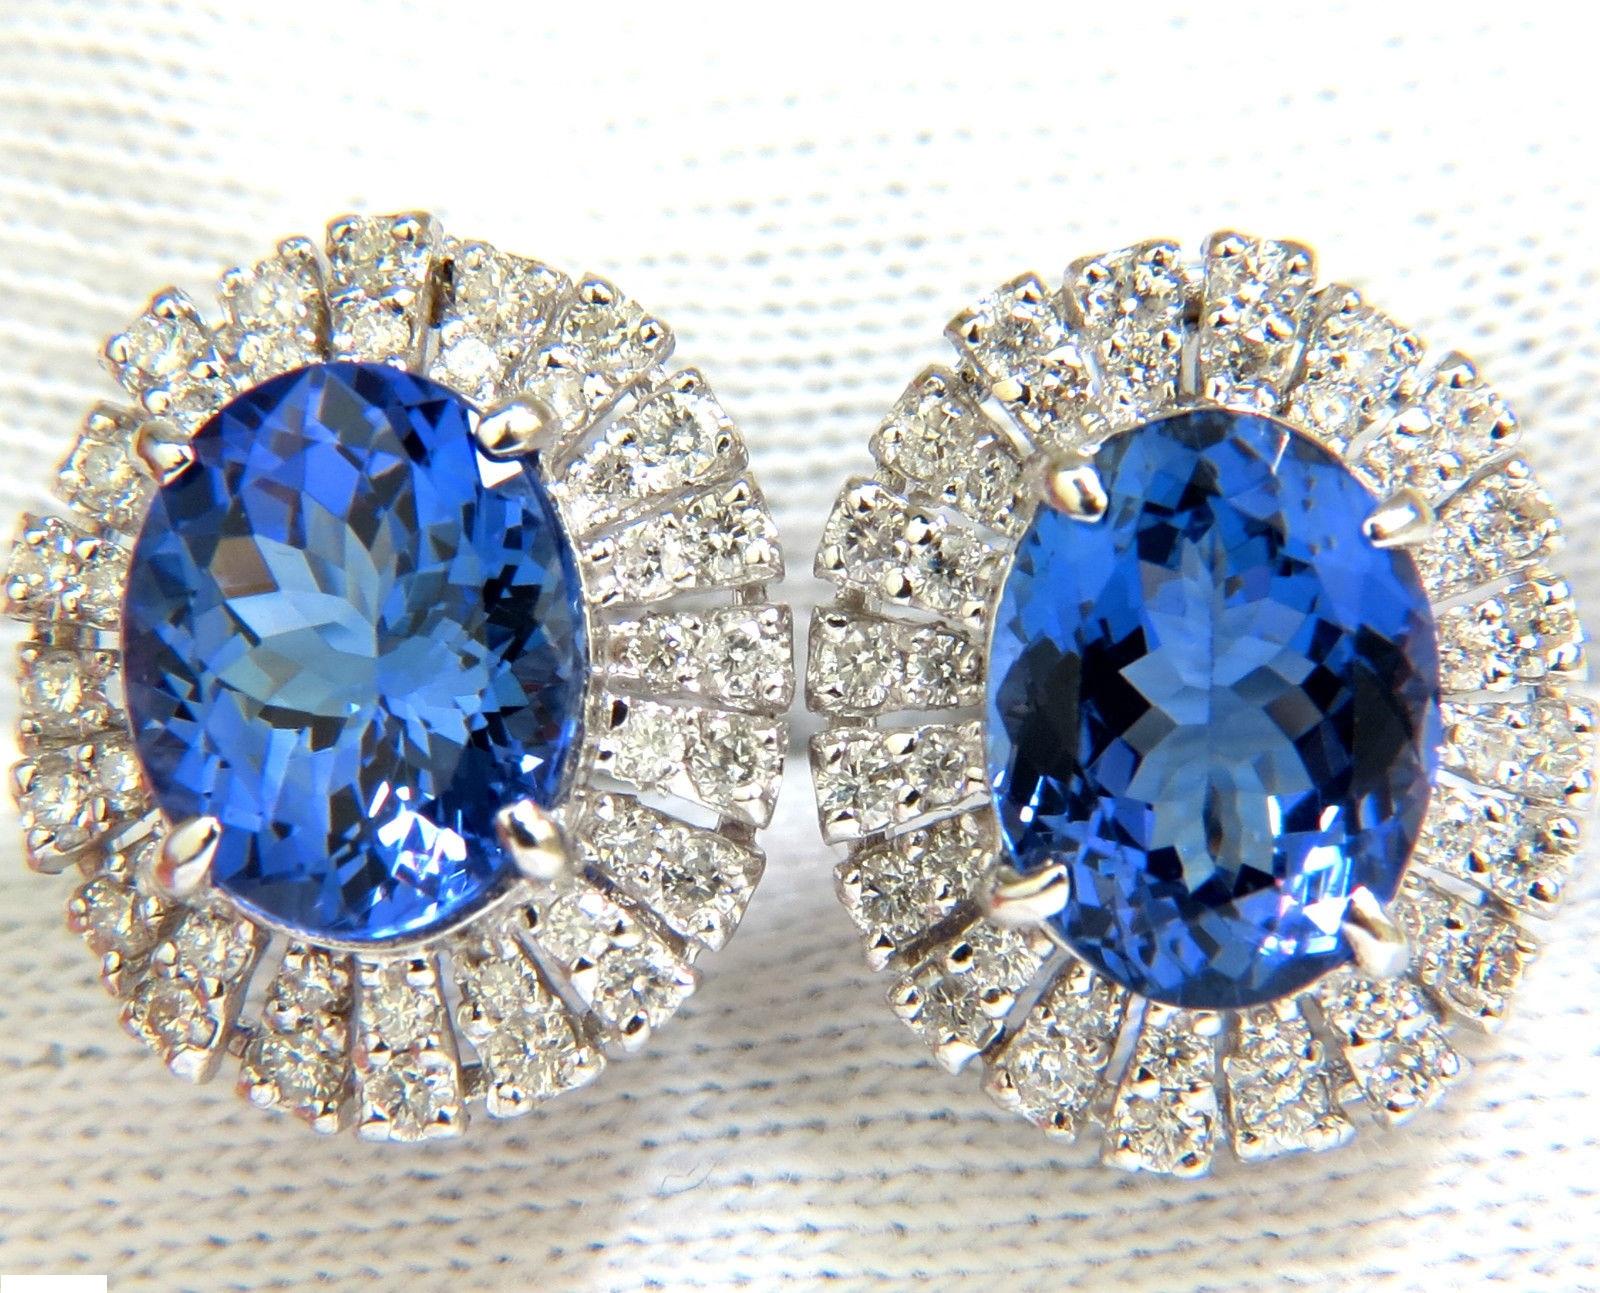 Glamour of Tanzanites


 6.58ct. Natural Fine Violetish blue tanzanite

Clean clarity, full oval cut and transparent.
Gorgeous intense vivid hue

10.5 X 8mm each.



1.00ct. diamonds on side 

G-color Vs-2 clarity

Rounds and full